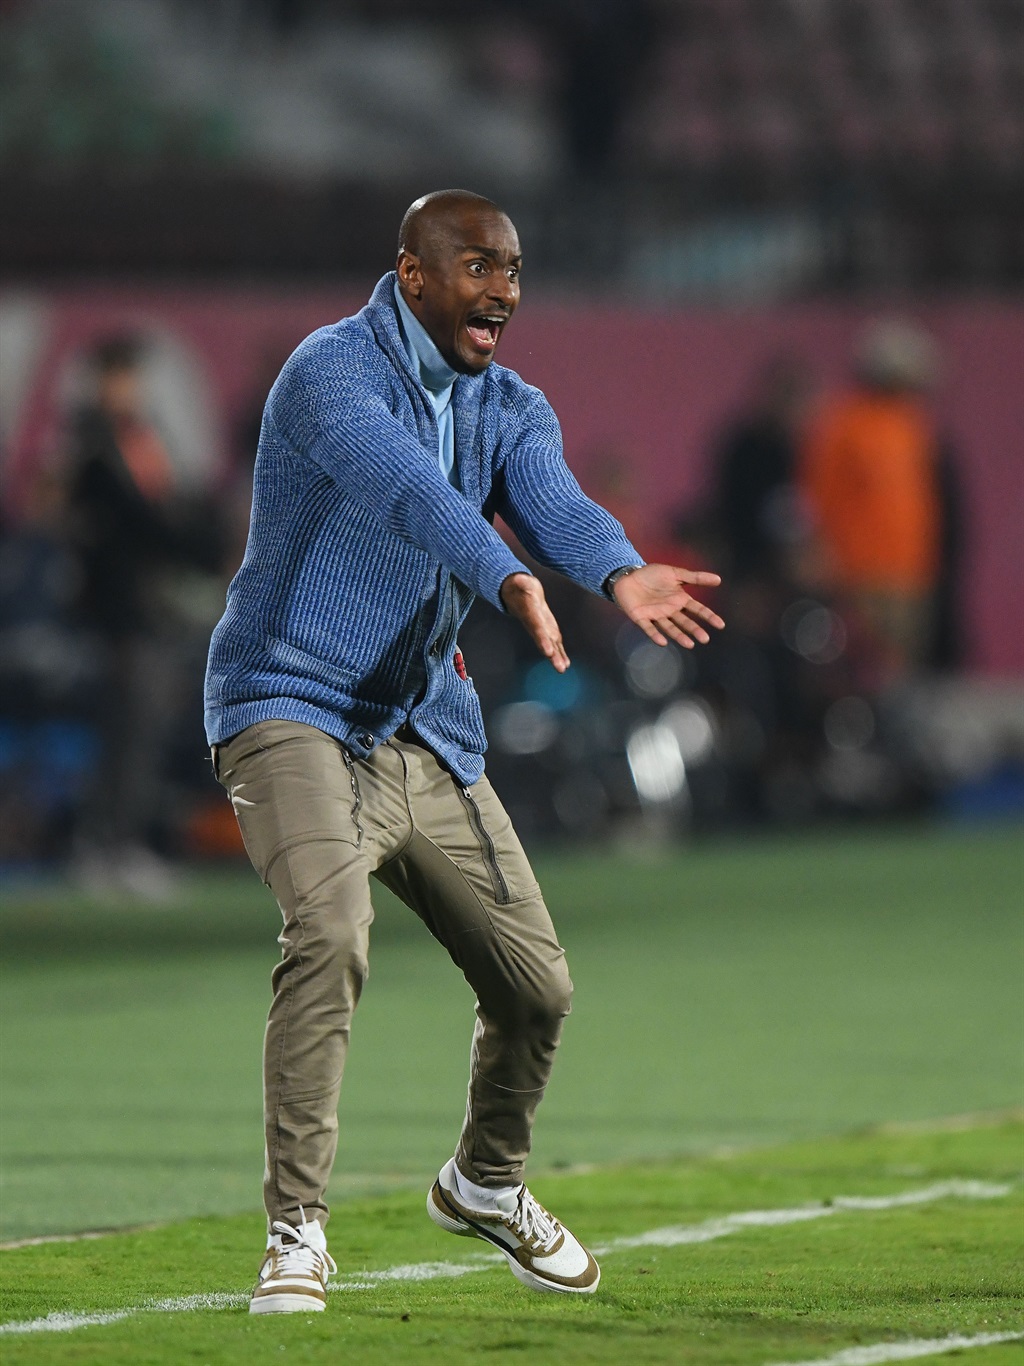 CAIRO, EGYPT - FEBRUARY 25: Rhulani Mokwena (Head Coach) of Mamelodi Sundowns during the CAF Champions League match between Al Ahly and Mamelodi Sundowns at Al Salam Stadium on February 25, 2023 in Cairo, Egypt. (Photo by Ahmed Hassan/Gallo Images)